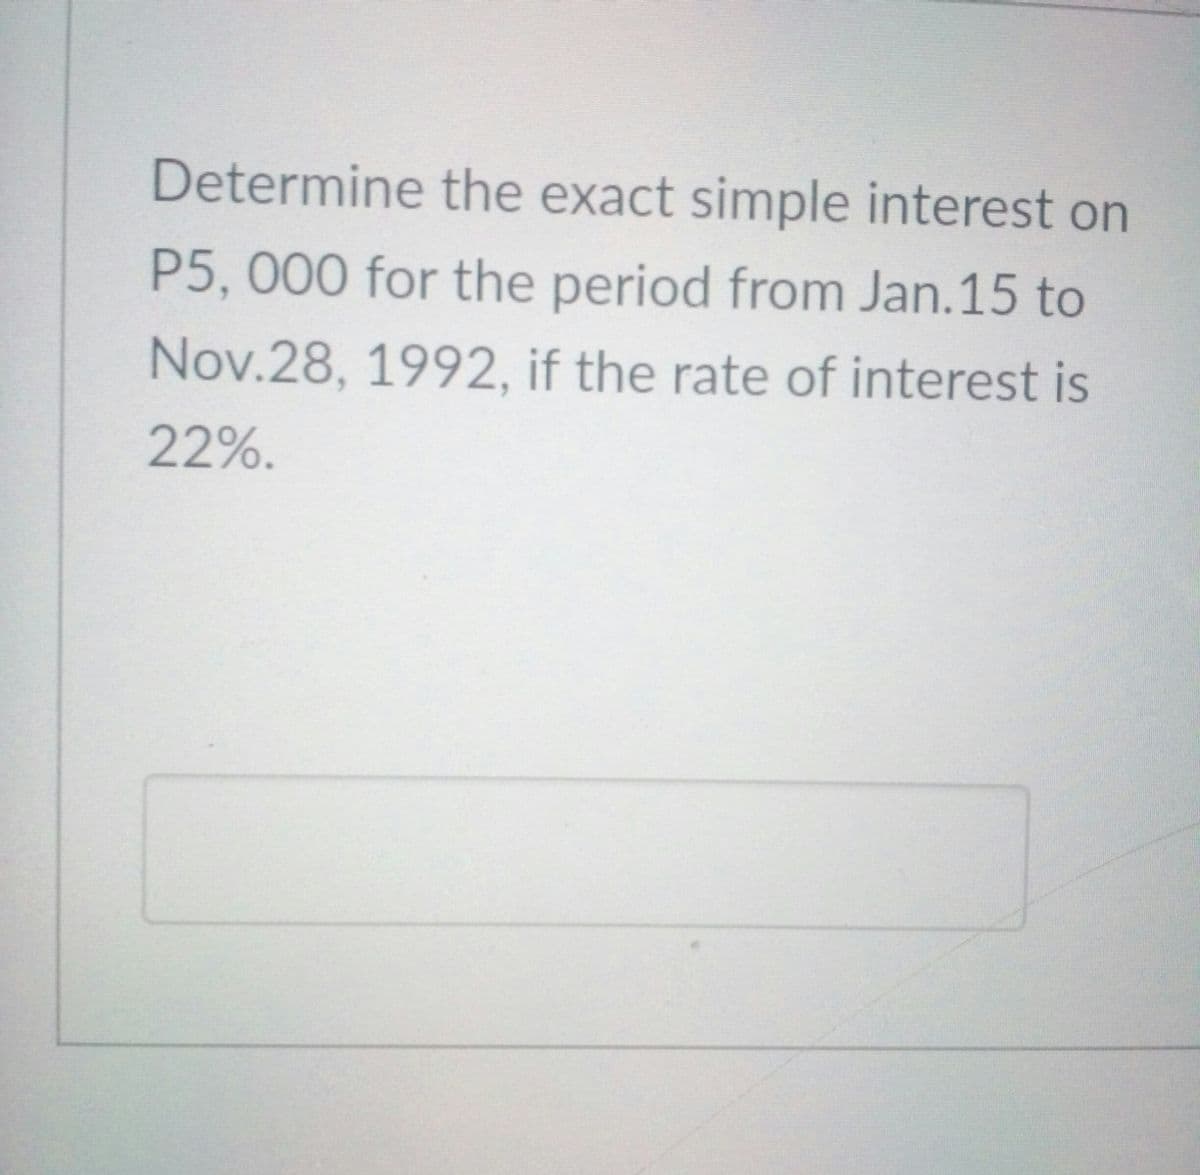 Determine the exact simple interest on
P5,000 for the period from Jan.15 to
Nov.28, 1992, if the rate of interest is
22%.
